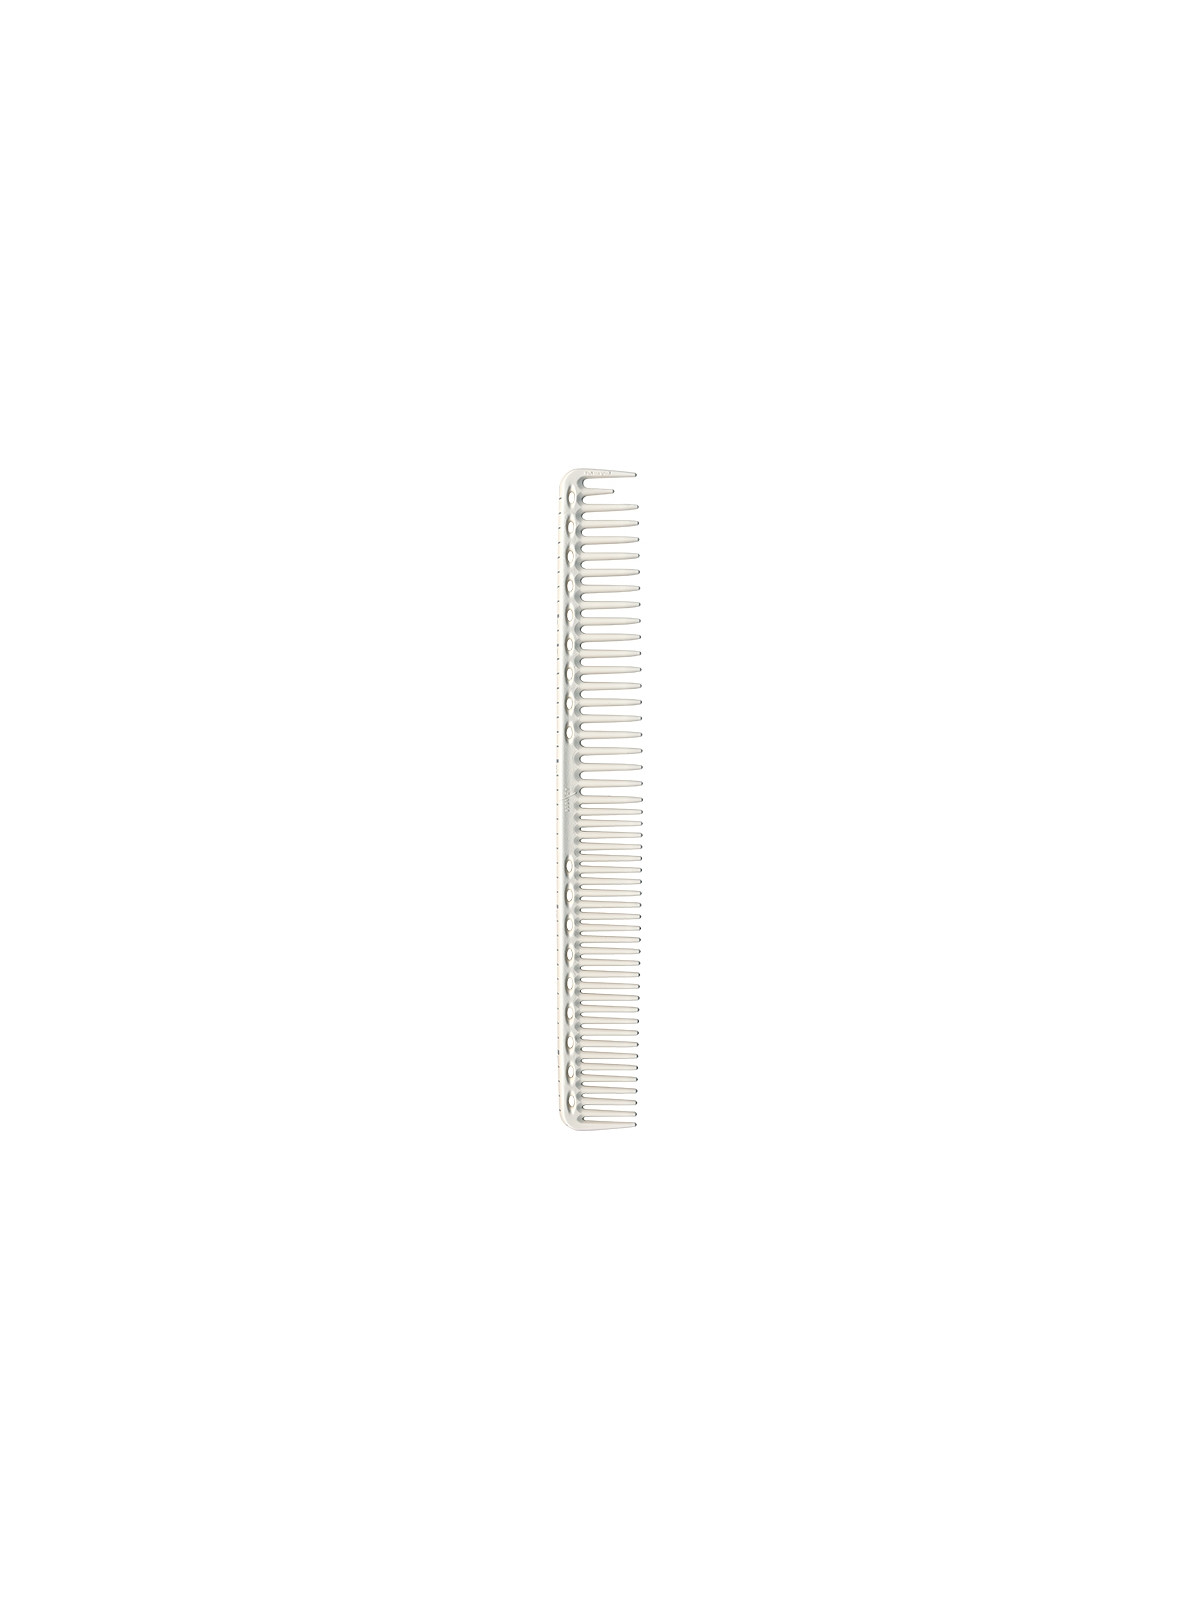 Y.S. Park G33 Cutting Comb with Guide 228mm